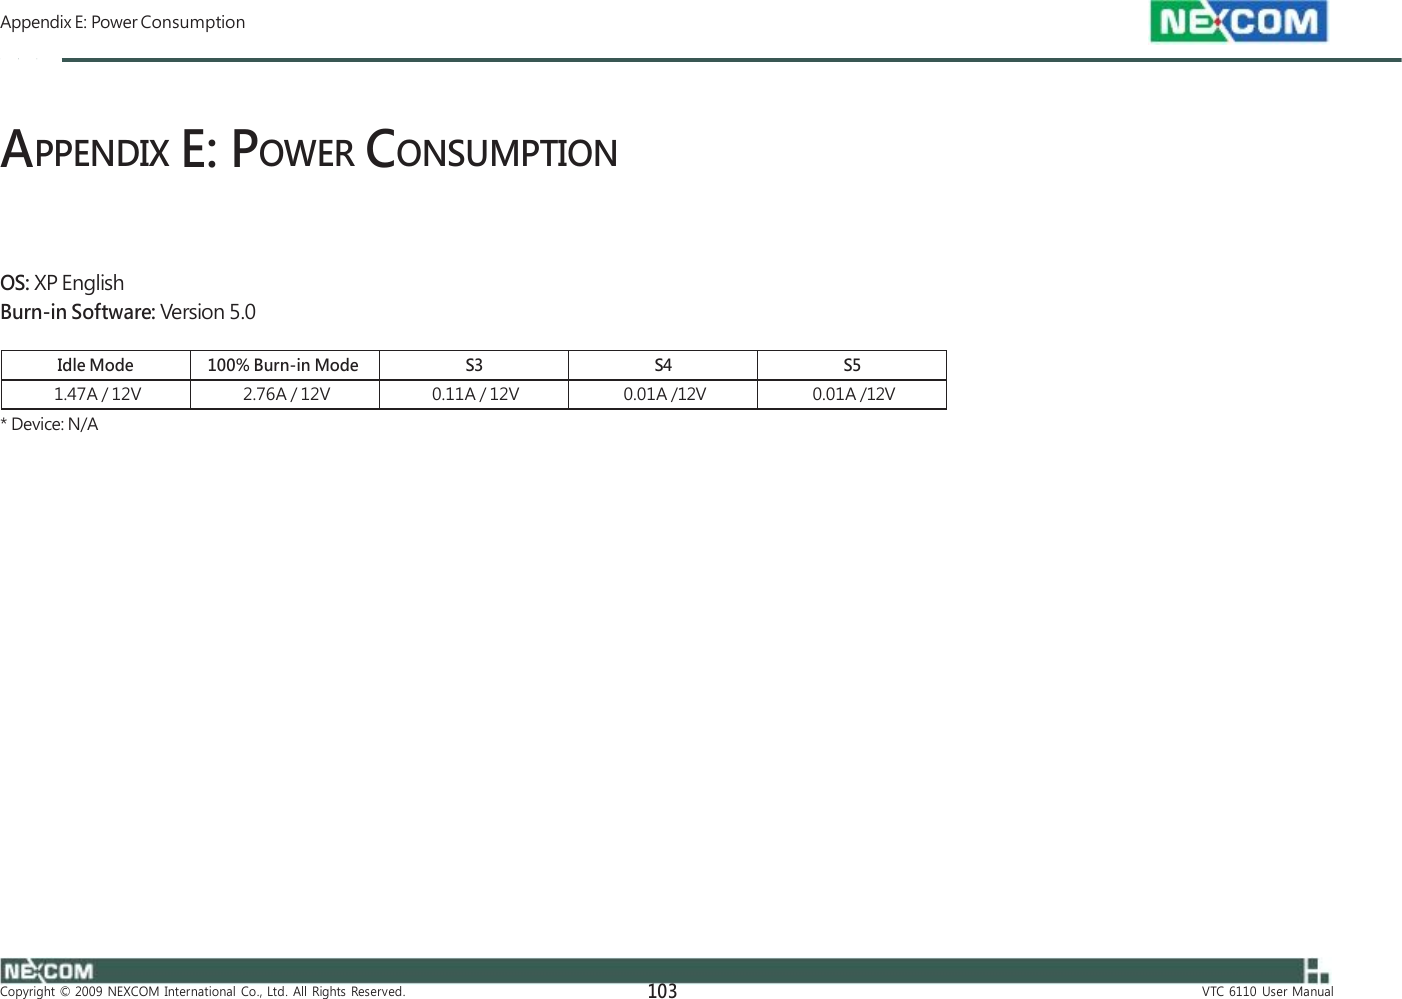  Appendix E: Power Consumption    APPENDIX E: POWER CONSUMPTION    OS: XP English Burn-in Software: Version 5.0    * Device: N/A                      Copyright  ©  2009  NEXCOM  International  Co.,  Ltd.  All  Rights  Reserved. 103 VTC  6110  User  Manual Idle Mode 100% Burn-in Mode S3 S4 S5 1.47A / 12V 2.76A / 12V 0.11A / 12V 0.01A /12V 0.01A /12V  